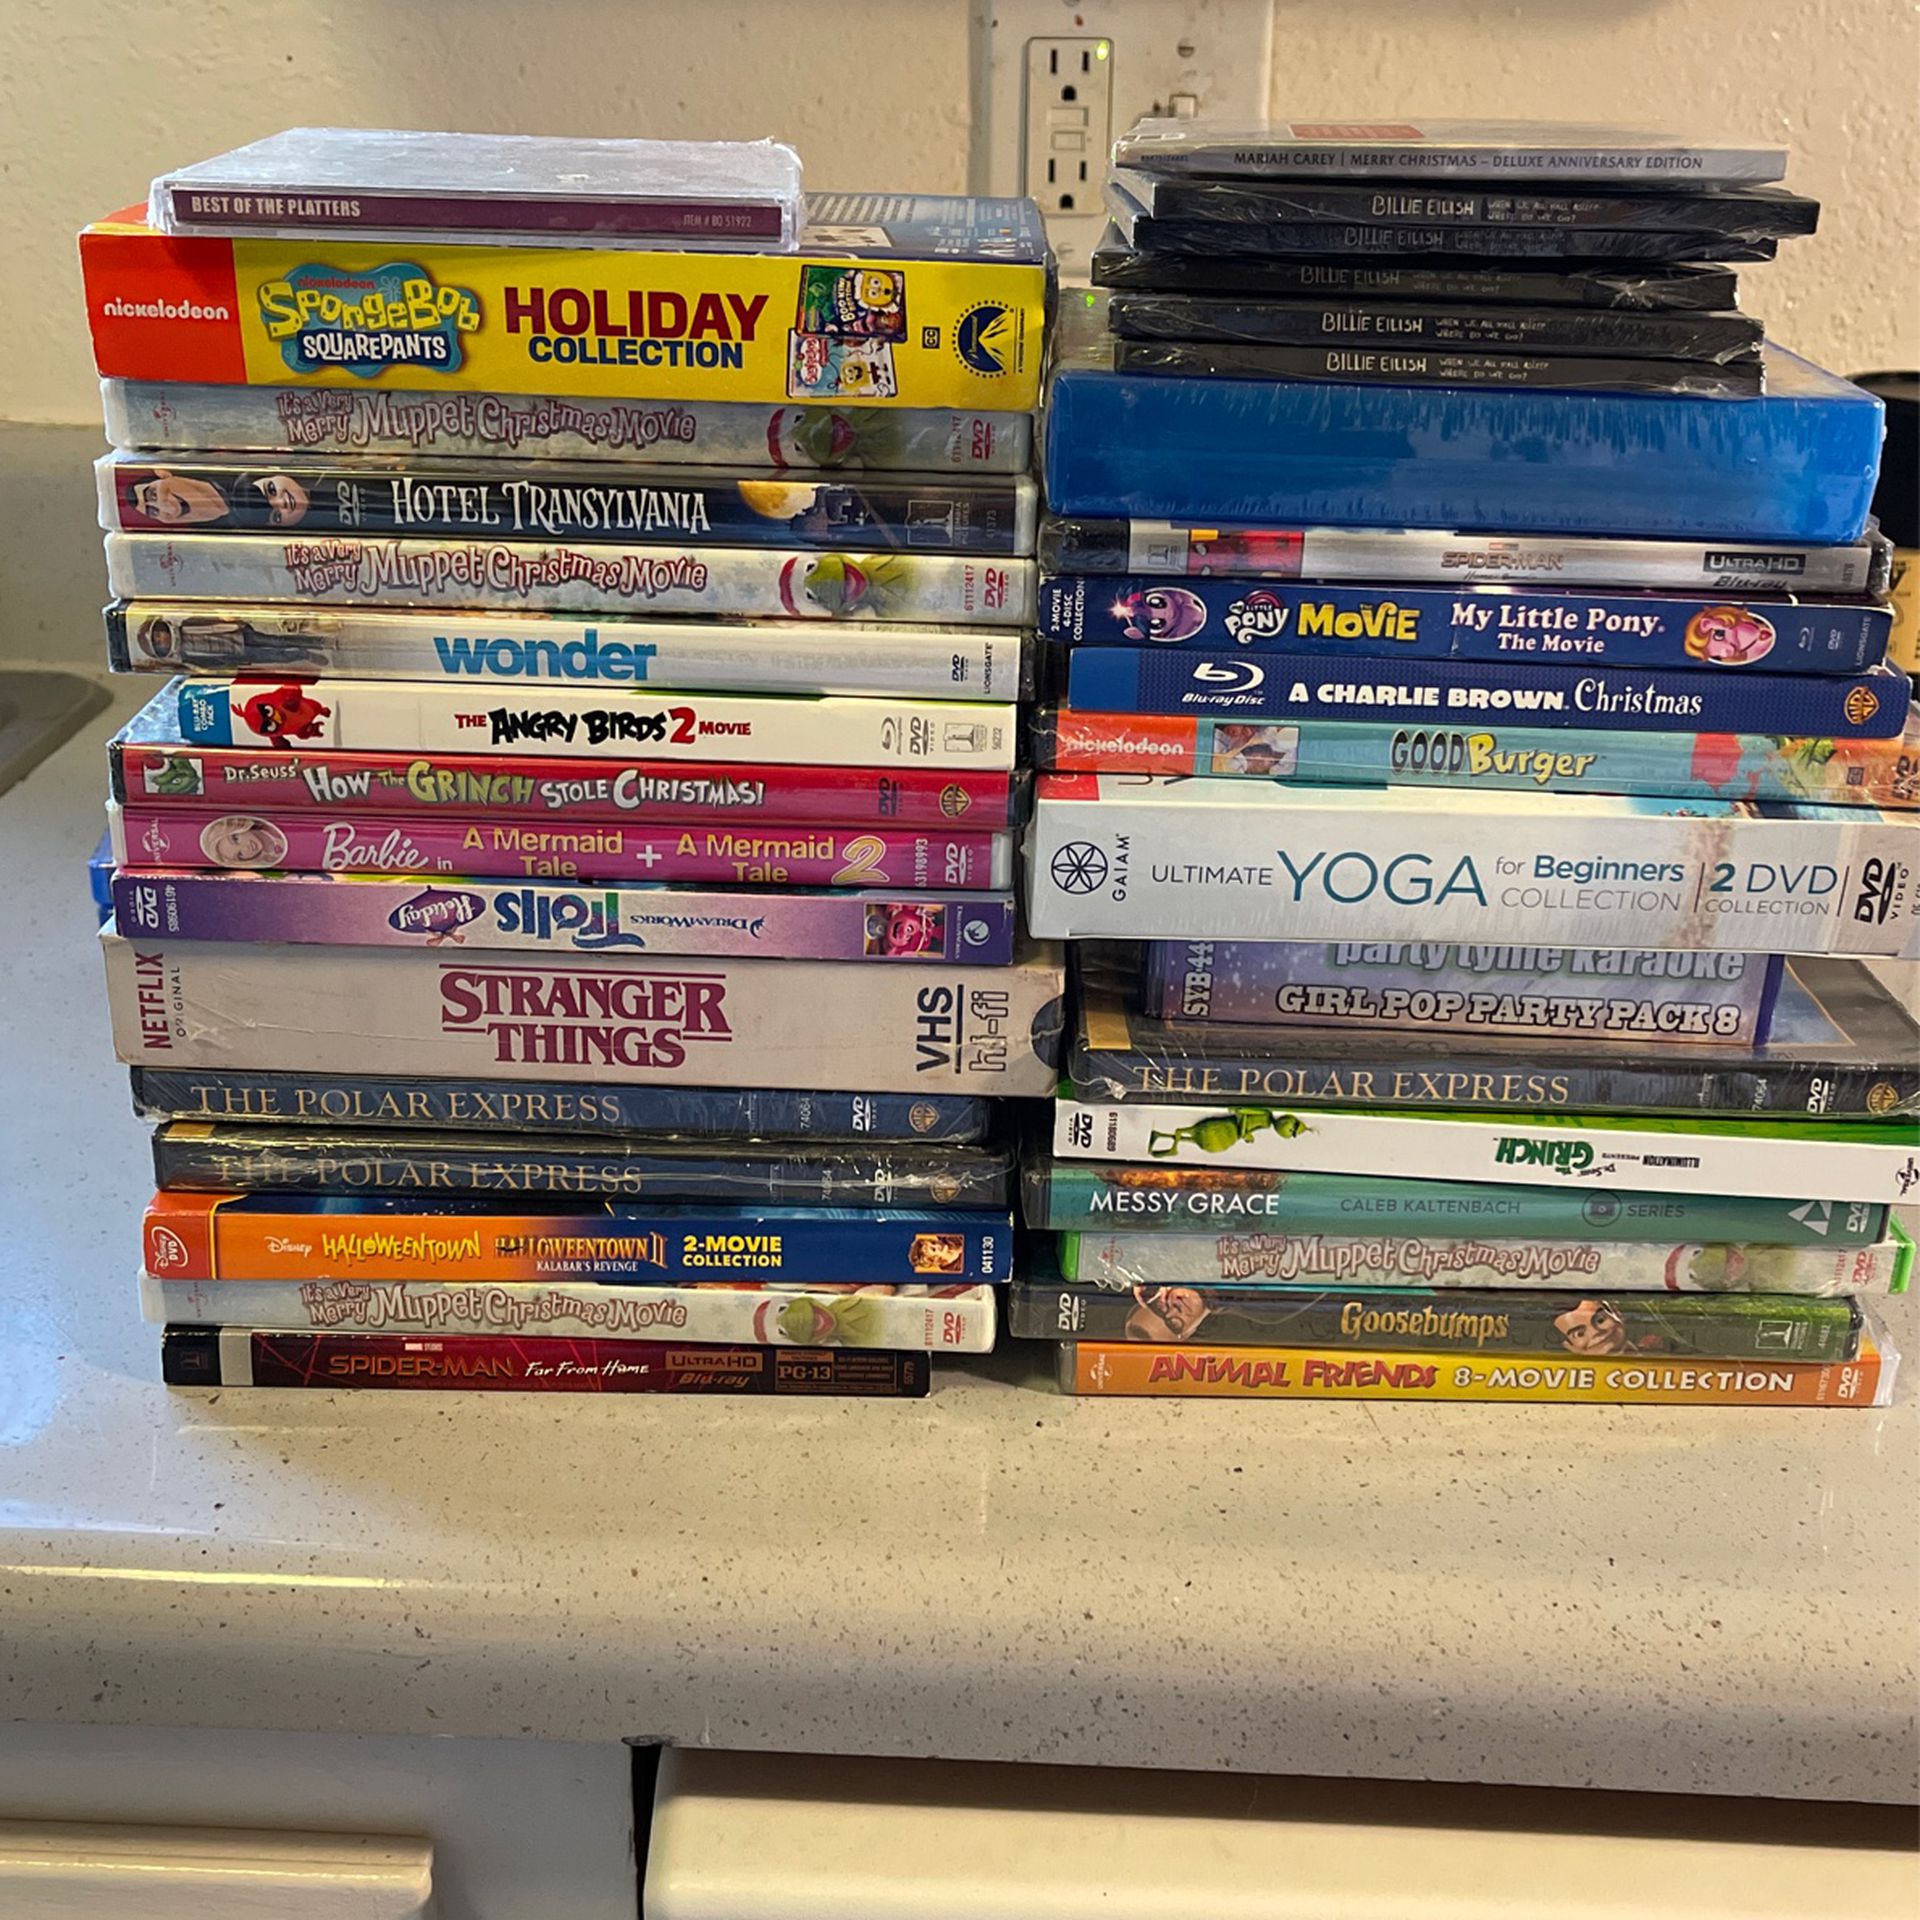 OER 25 BRAND NEW DVDS AND CDS MUST GO TODAY! HOLIDAY MOVIES POLAR EXPRESS, TROLLZ, STRANGER THINGS, GRINCH